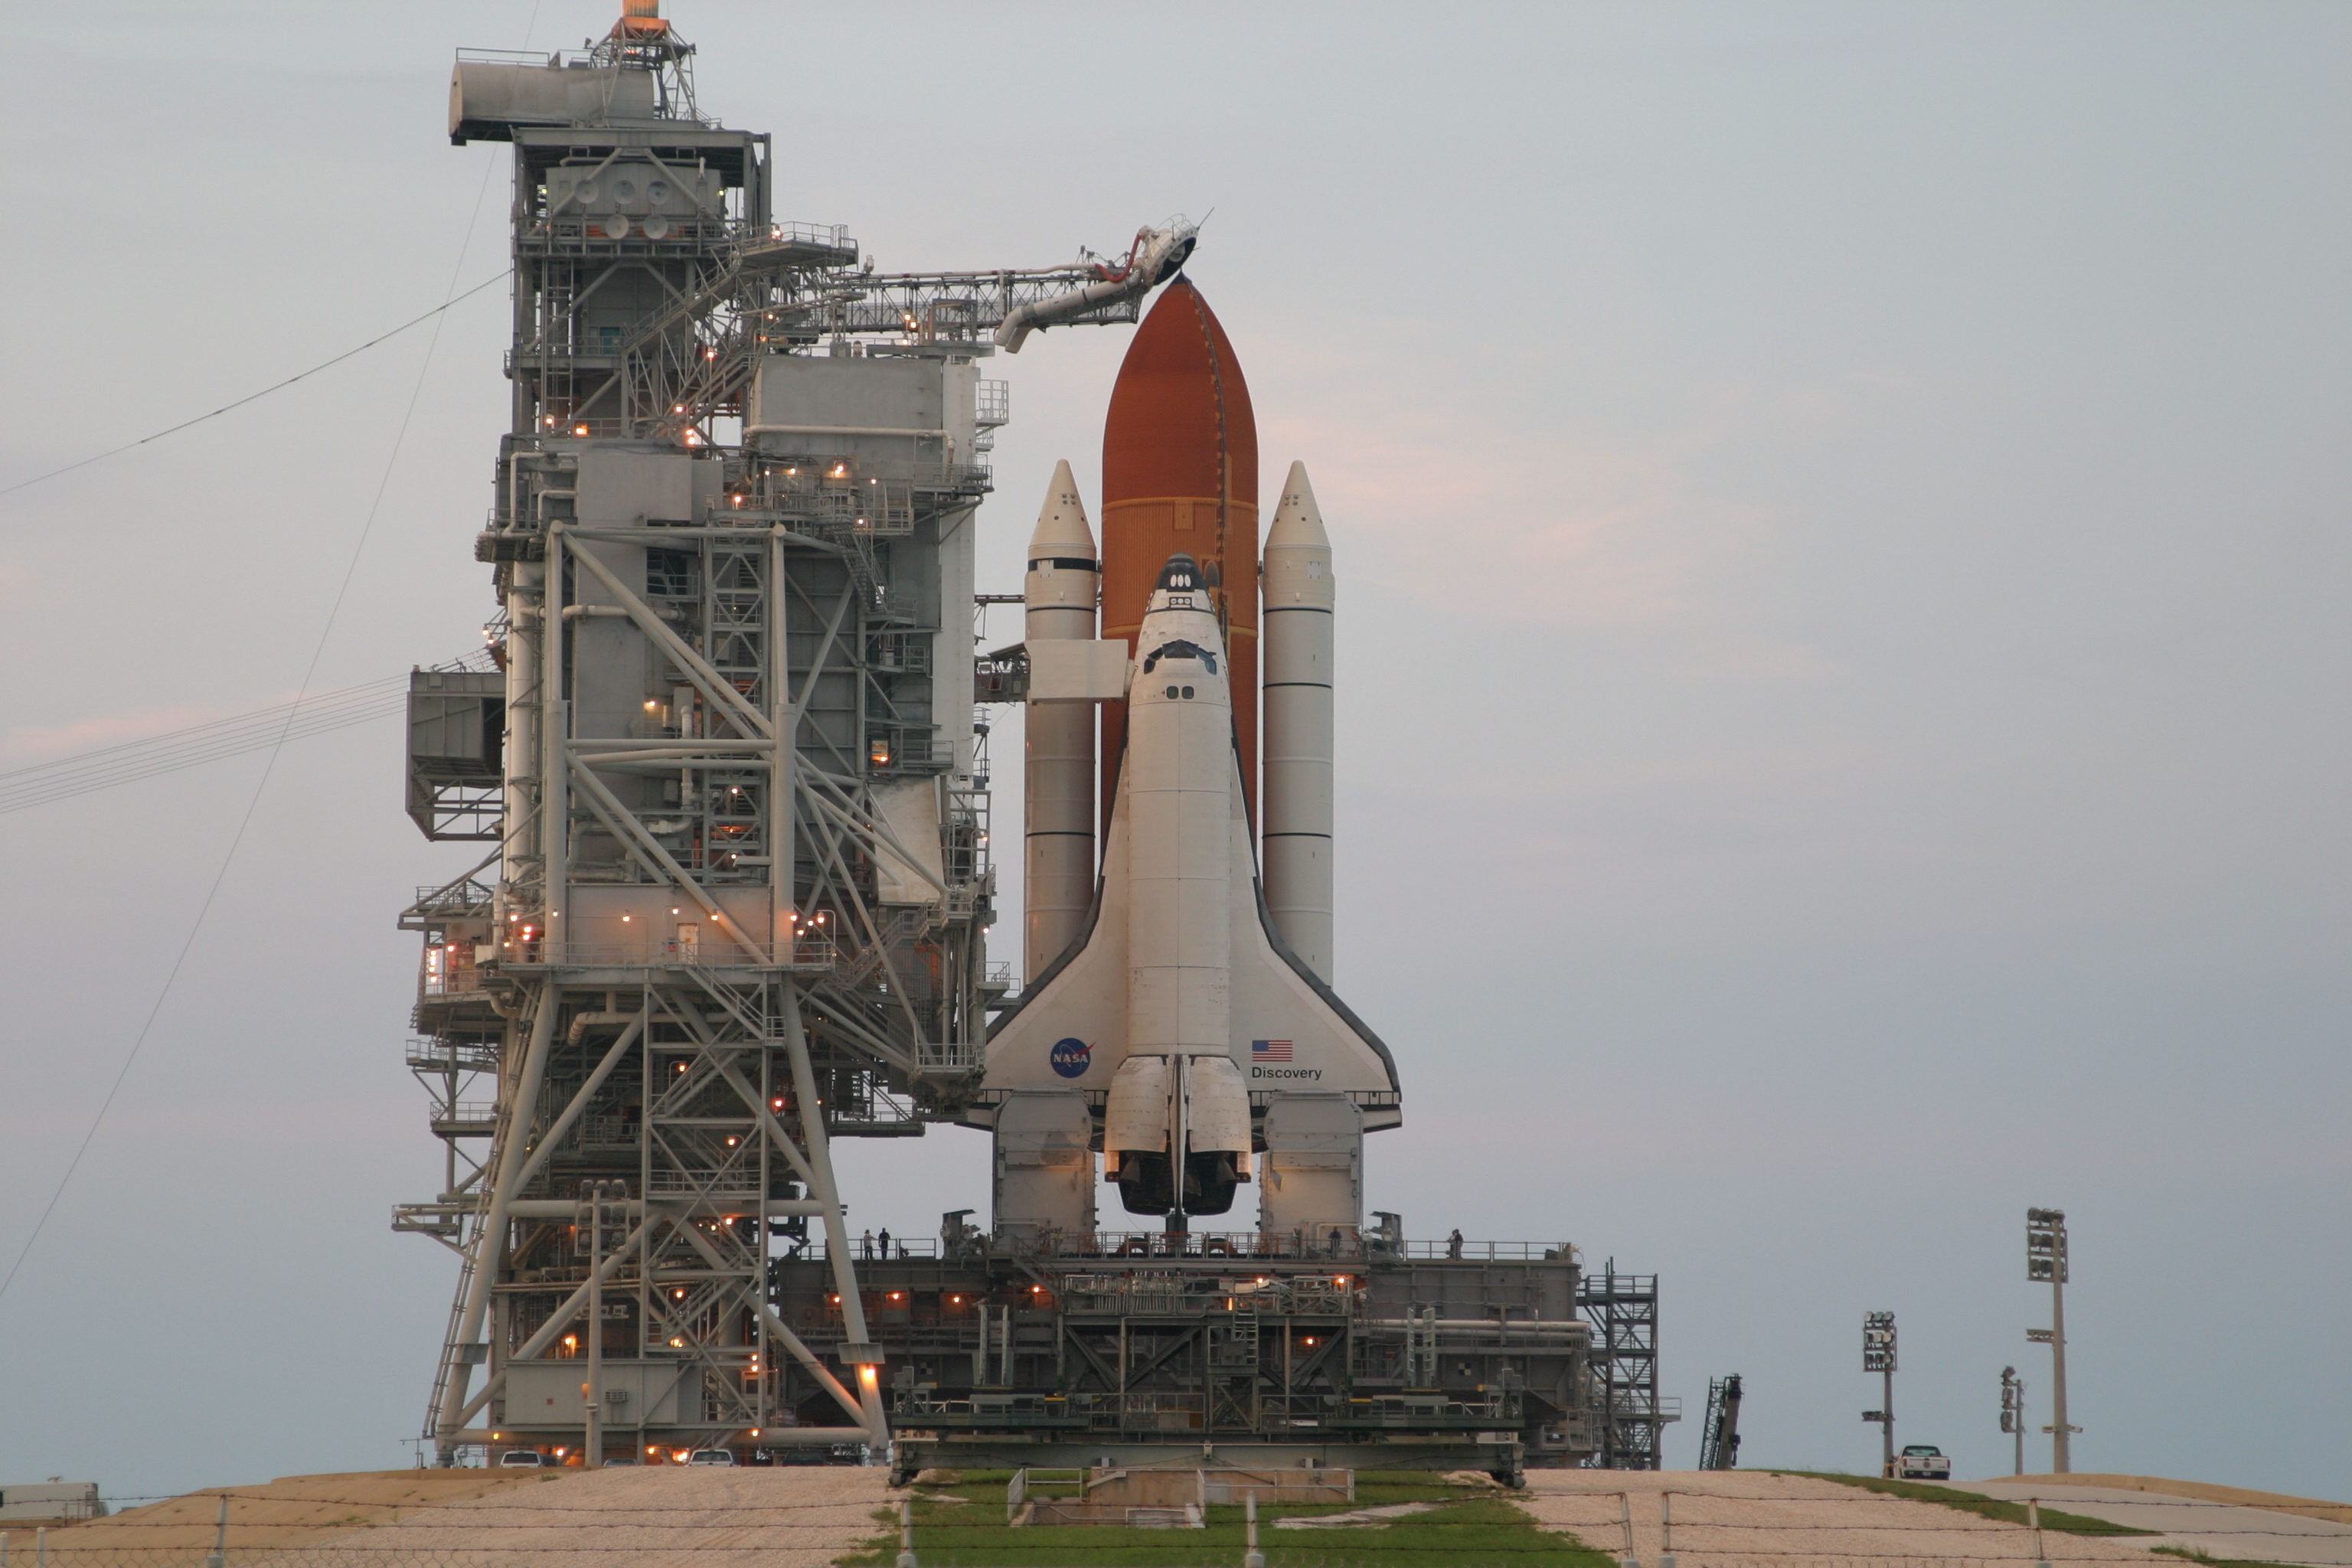 http://www.esa.int/var/esa/storage/images/esa_multimedia/images/2006/07/space_shuttle_discovery_stands_ready_on_launch_pad_39b2/9893651-2-eng-GB/Space_Shuttle_Discovery_stands_ready_on_Launch_Pad_39B.jpg